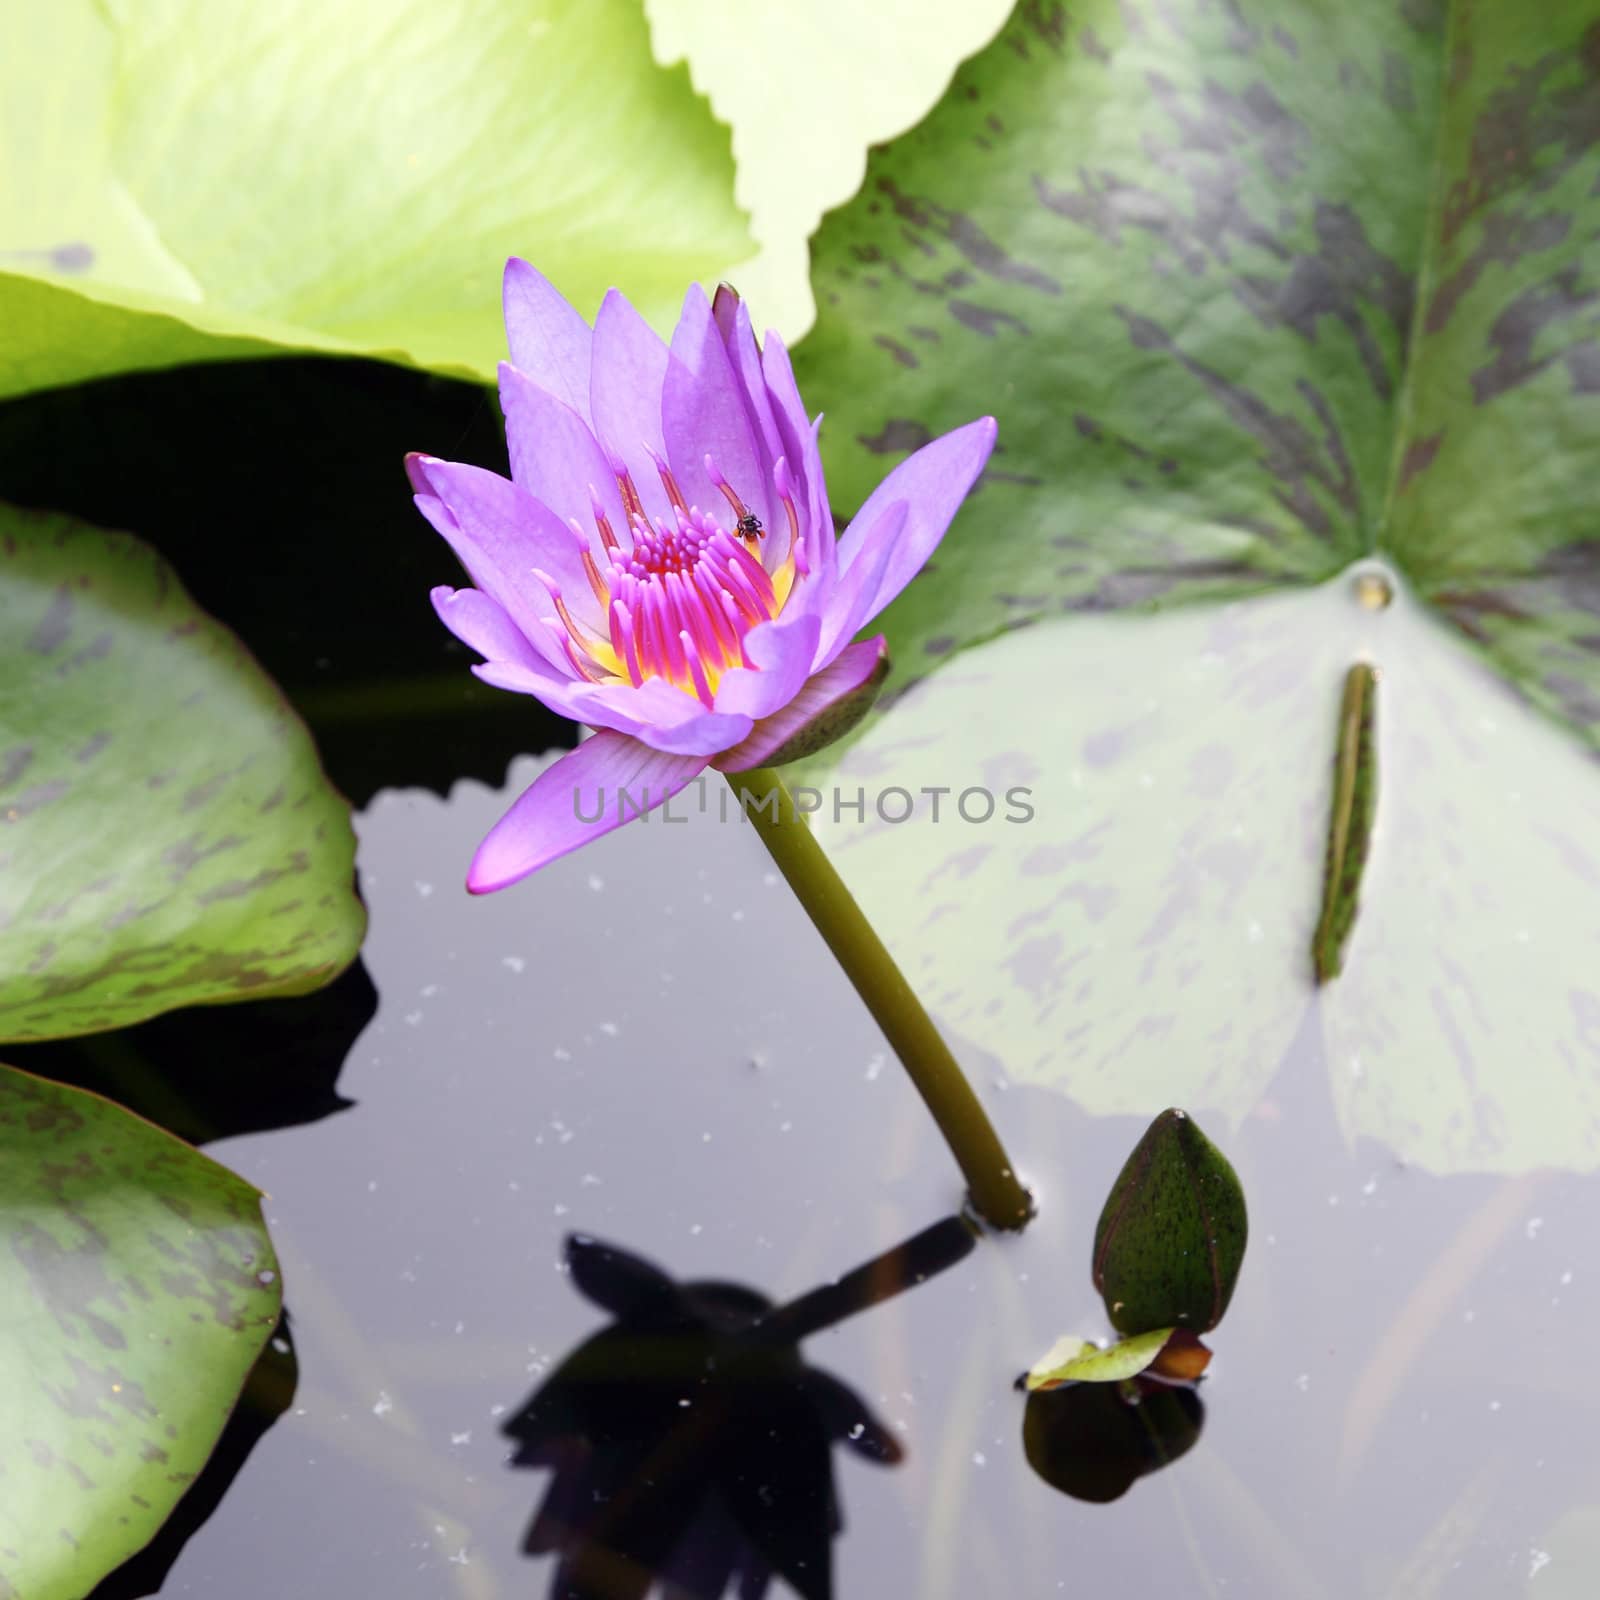 The blooming purple lotus in the natural pond with insect by geargodz